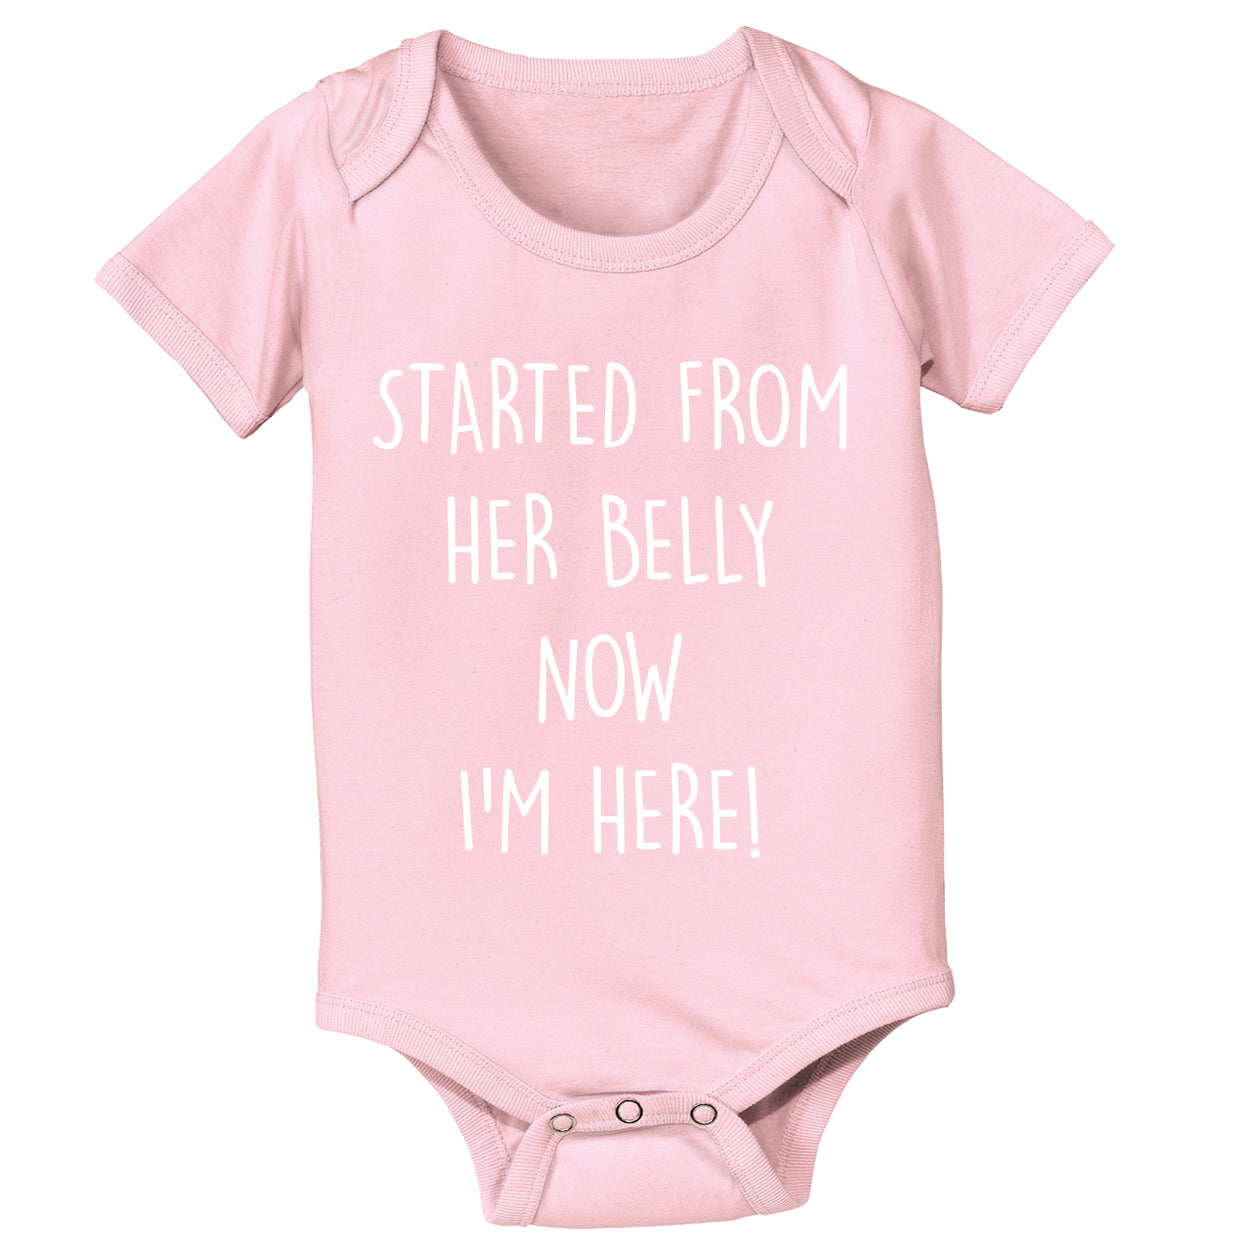 Started From Her Belly Now I'm Here Tshirt - Donkey Tees